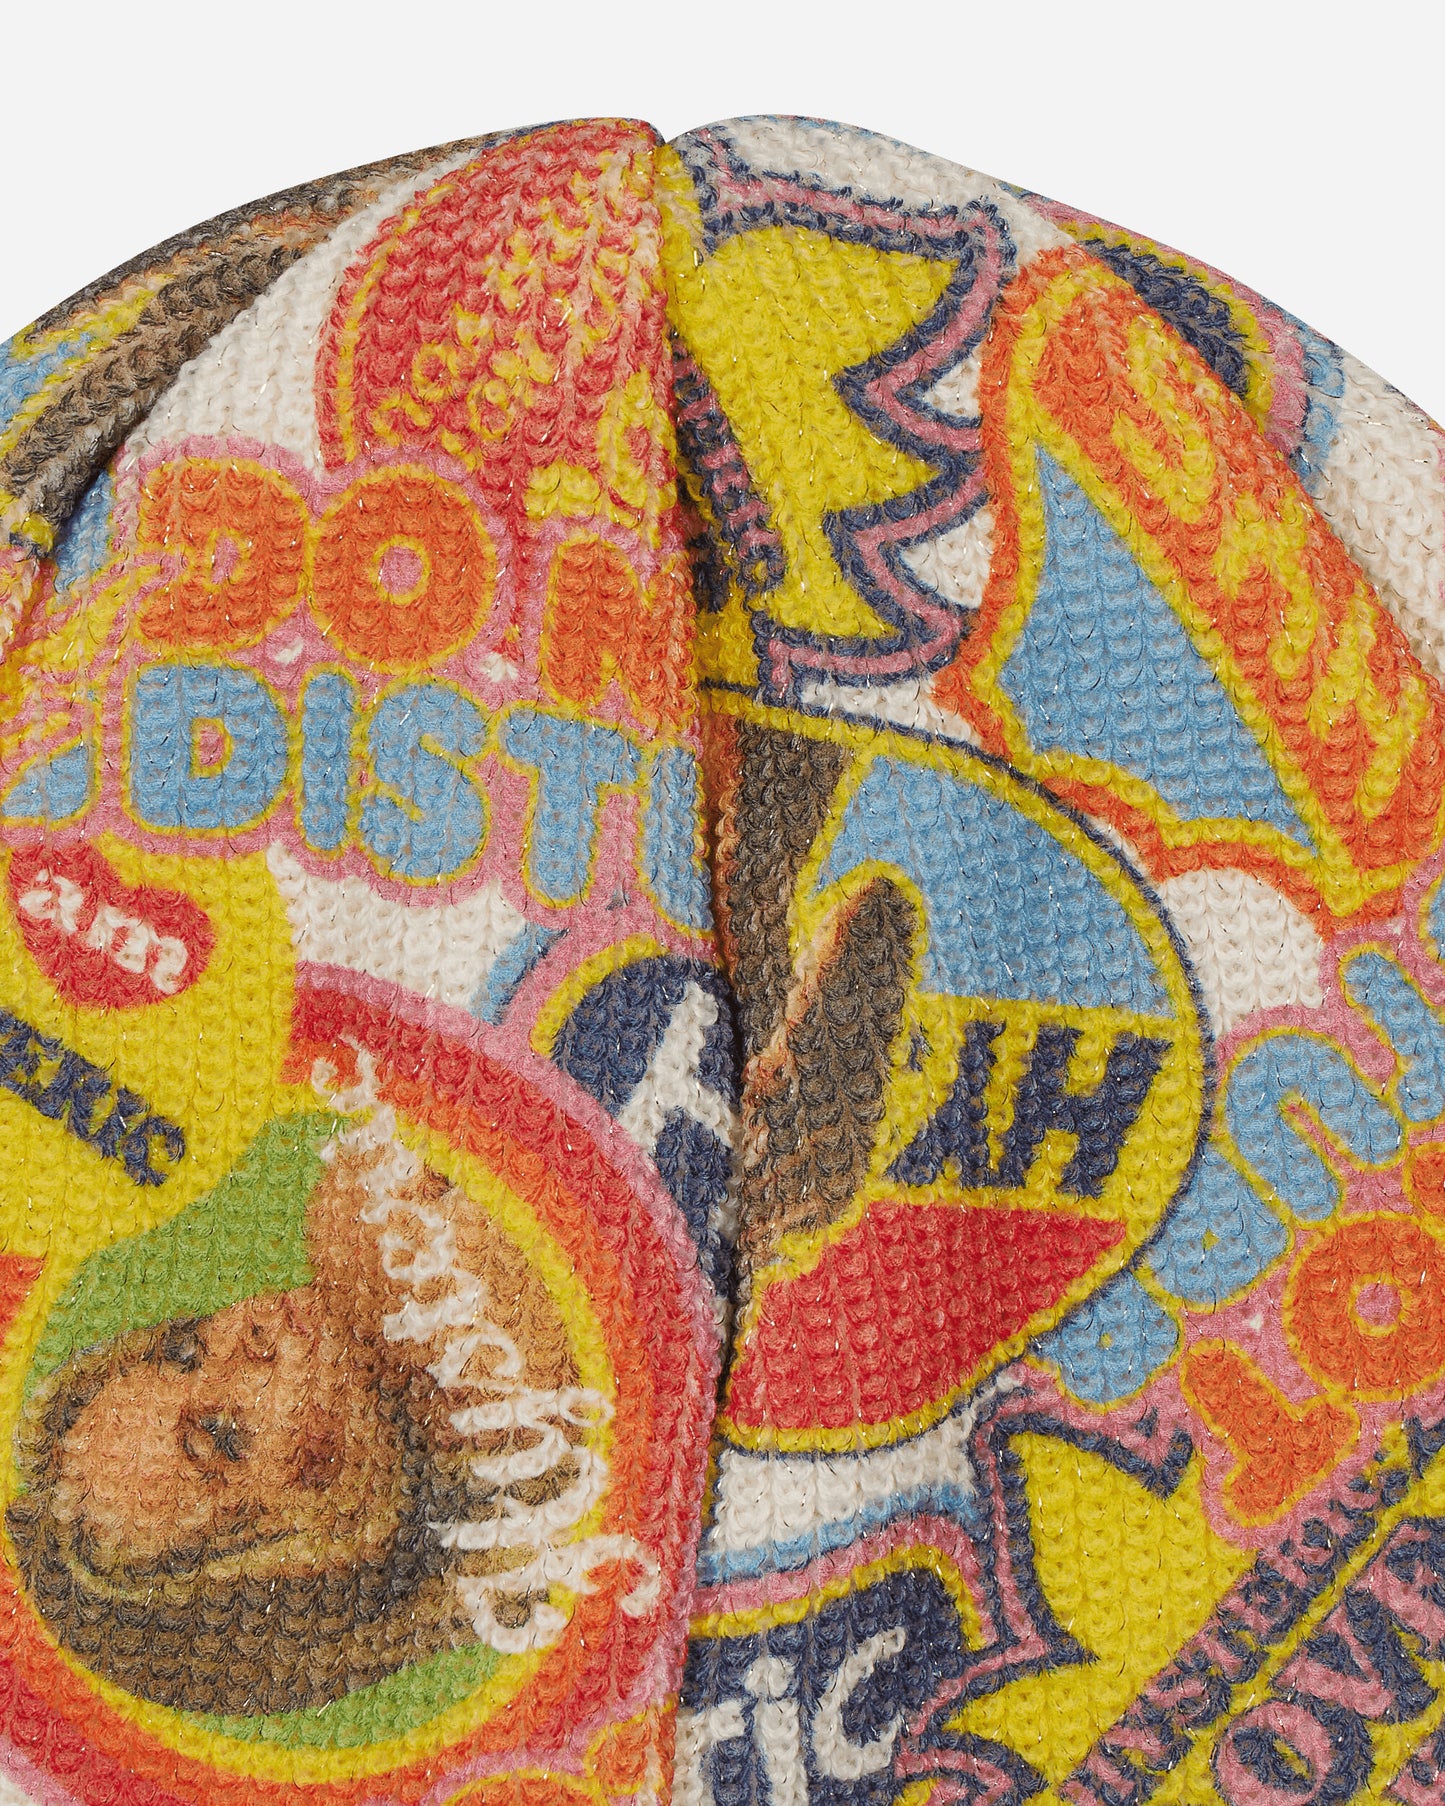 Hysteric Glamour Wmns Typical Hysteric Multi Hats Beanies 01241QH039 A